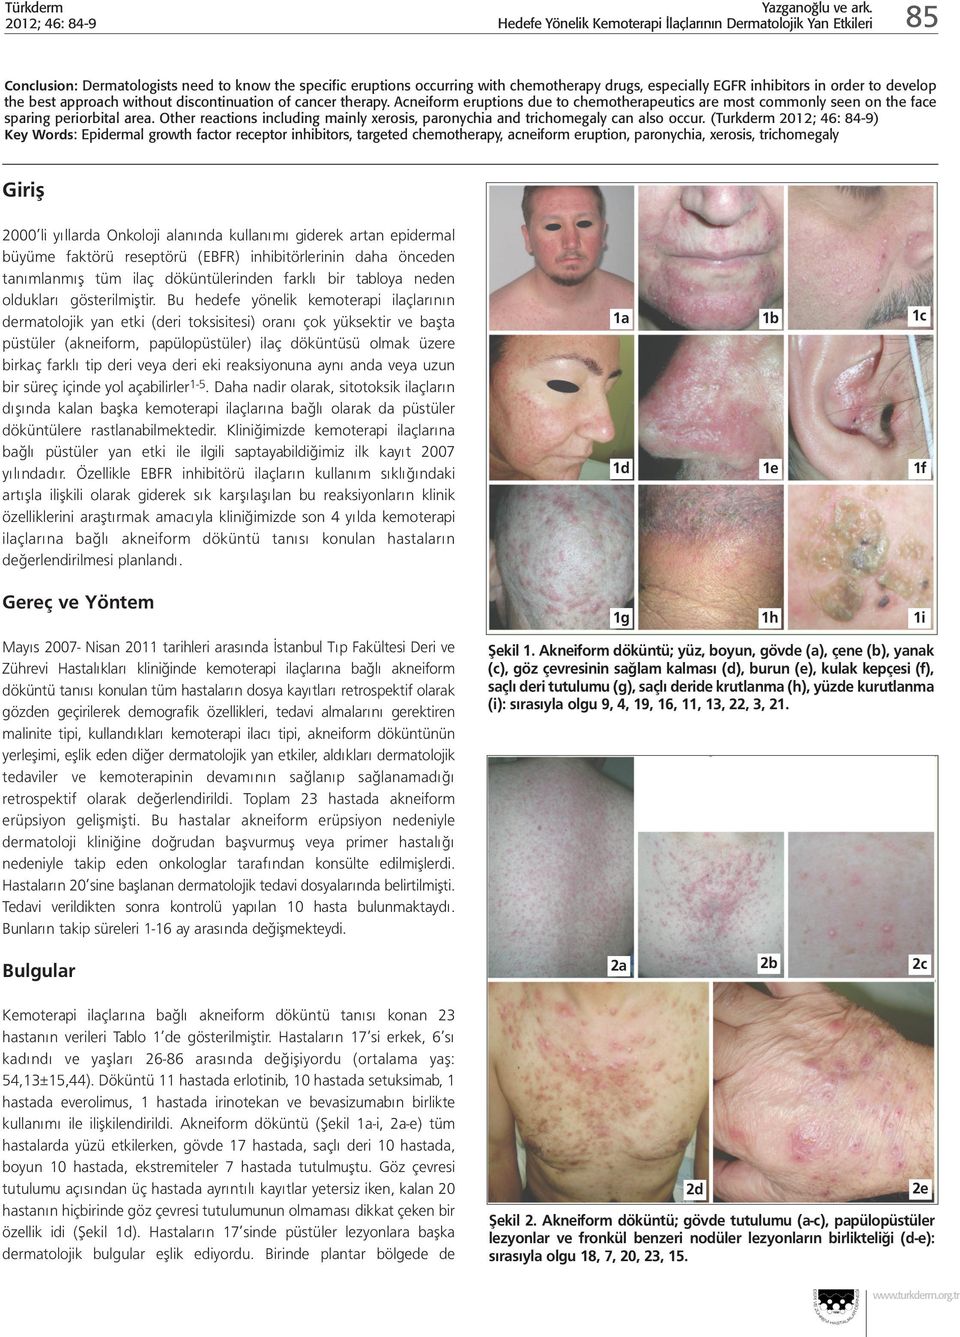 Acneiform eruptions due to chemotherapeutics are most commonly seen on the face sparing periorbital area. Other reactions including mainly xerosis, paronychia and trichomegaly can also occur.